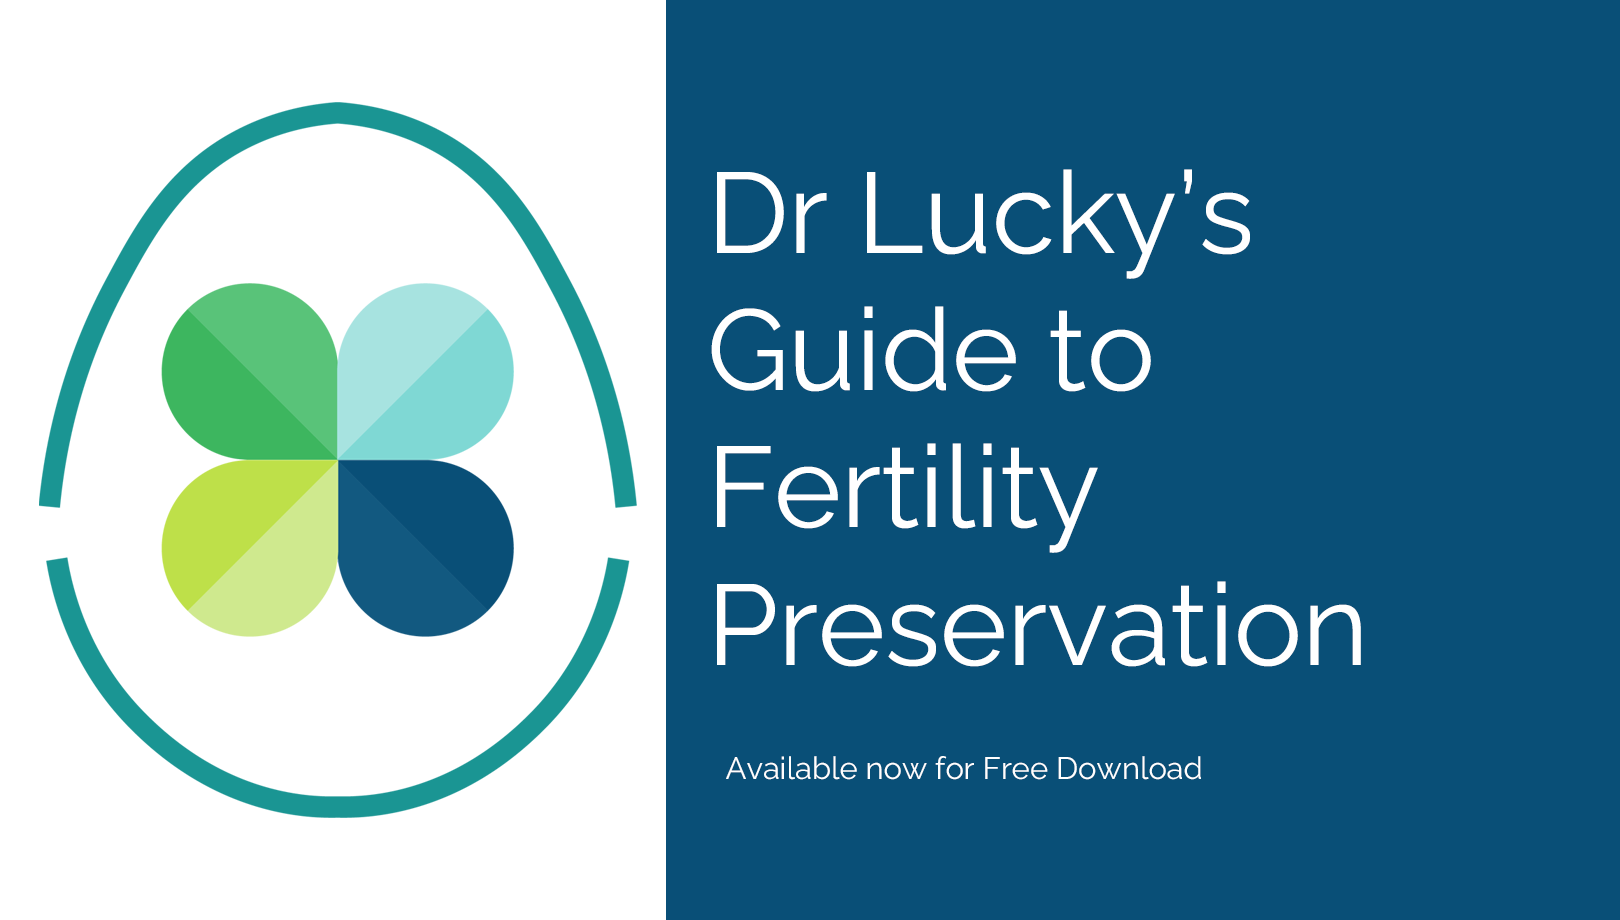 Introducing Dr Lucky’s Guide to Fertility Preservation